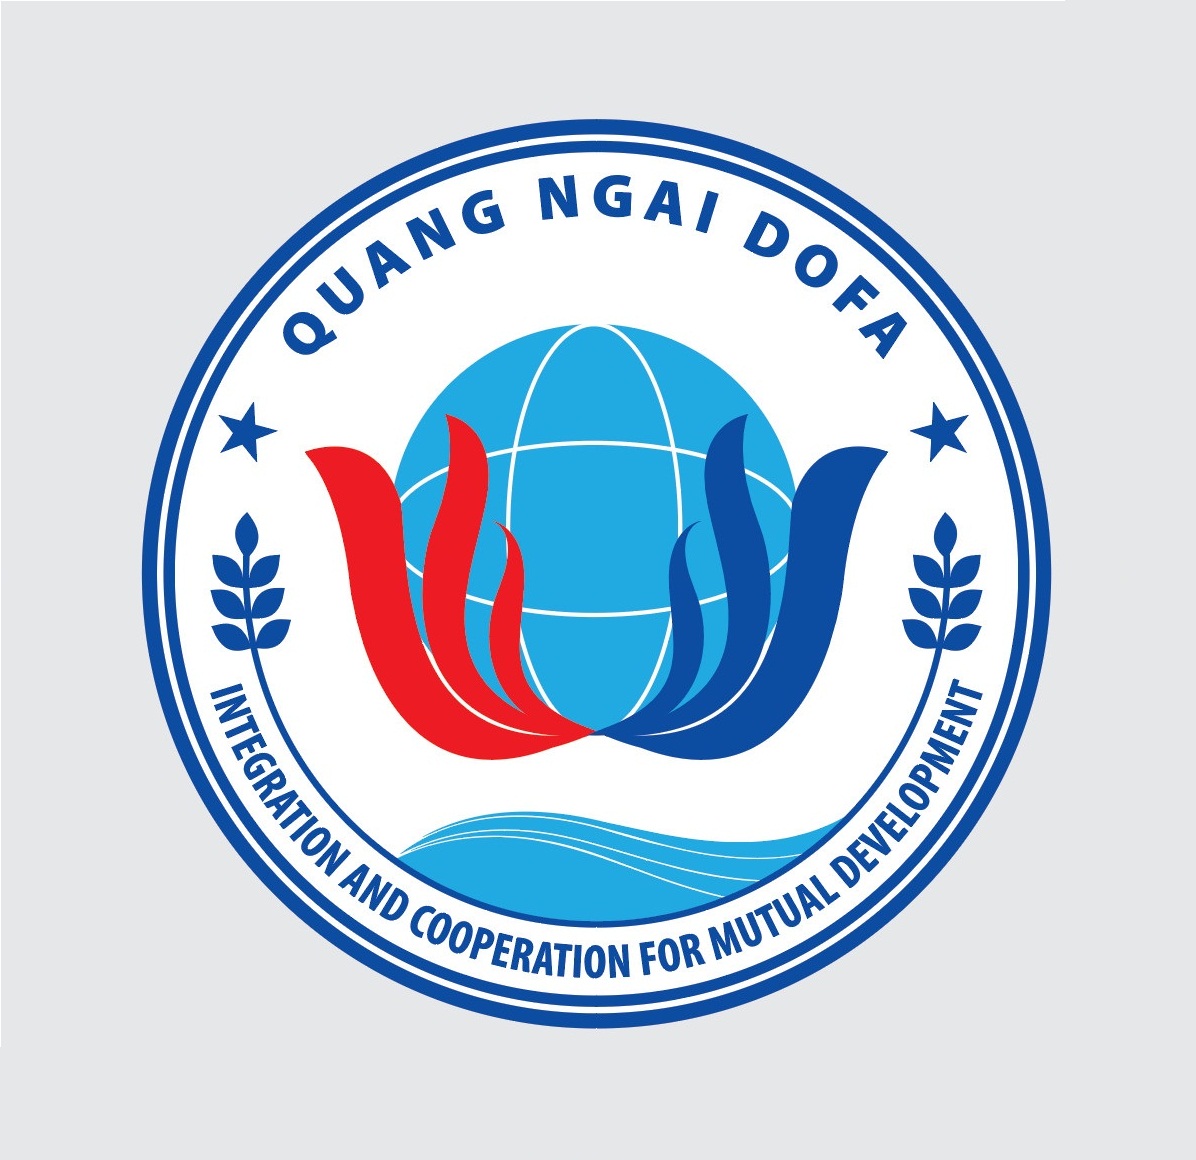 The official logo of the Quang Ngai Department of Foreign Affairs